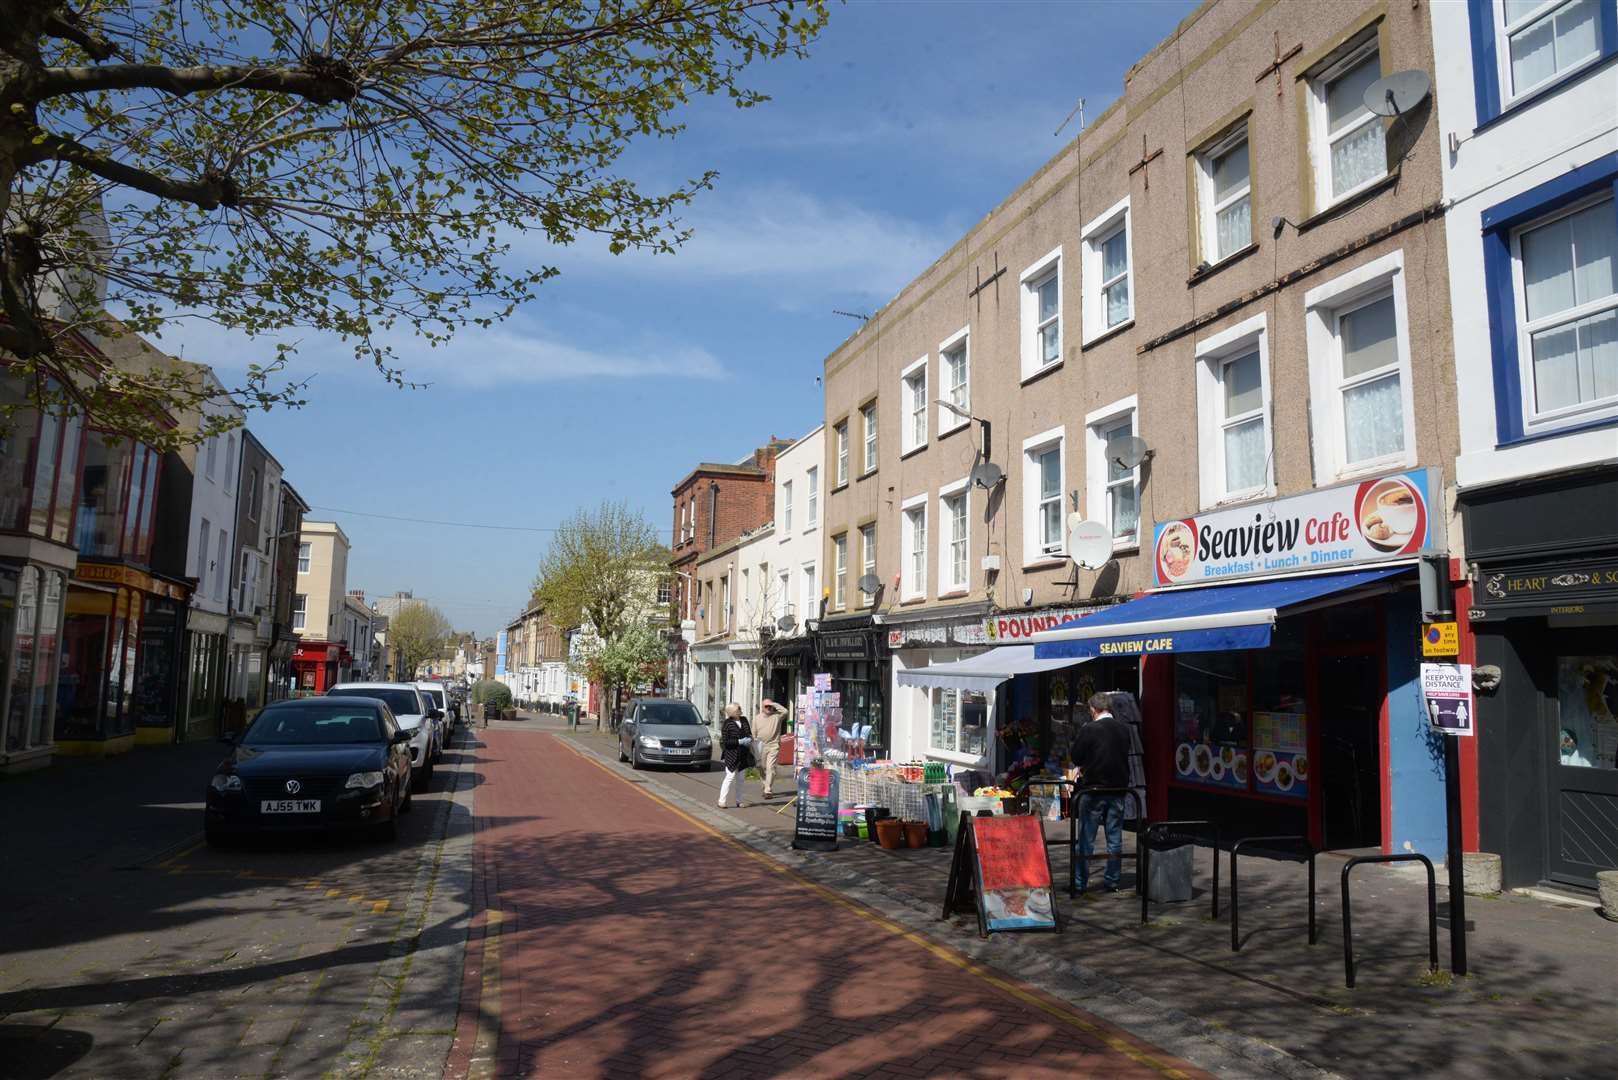 The make-up of previously busy retail areas like Mortimer Street in Herne Bay are predicted to become more leisure-focused